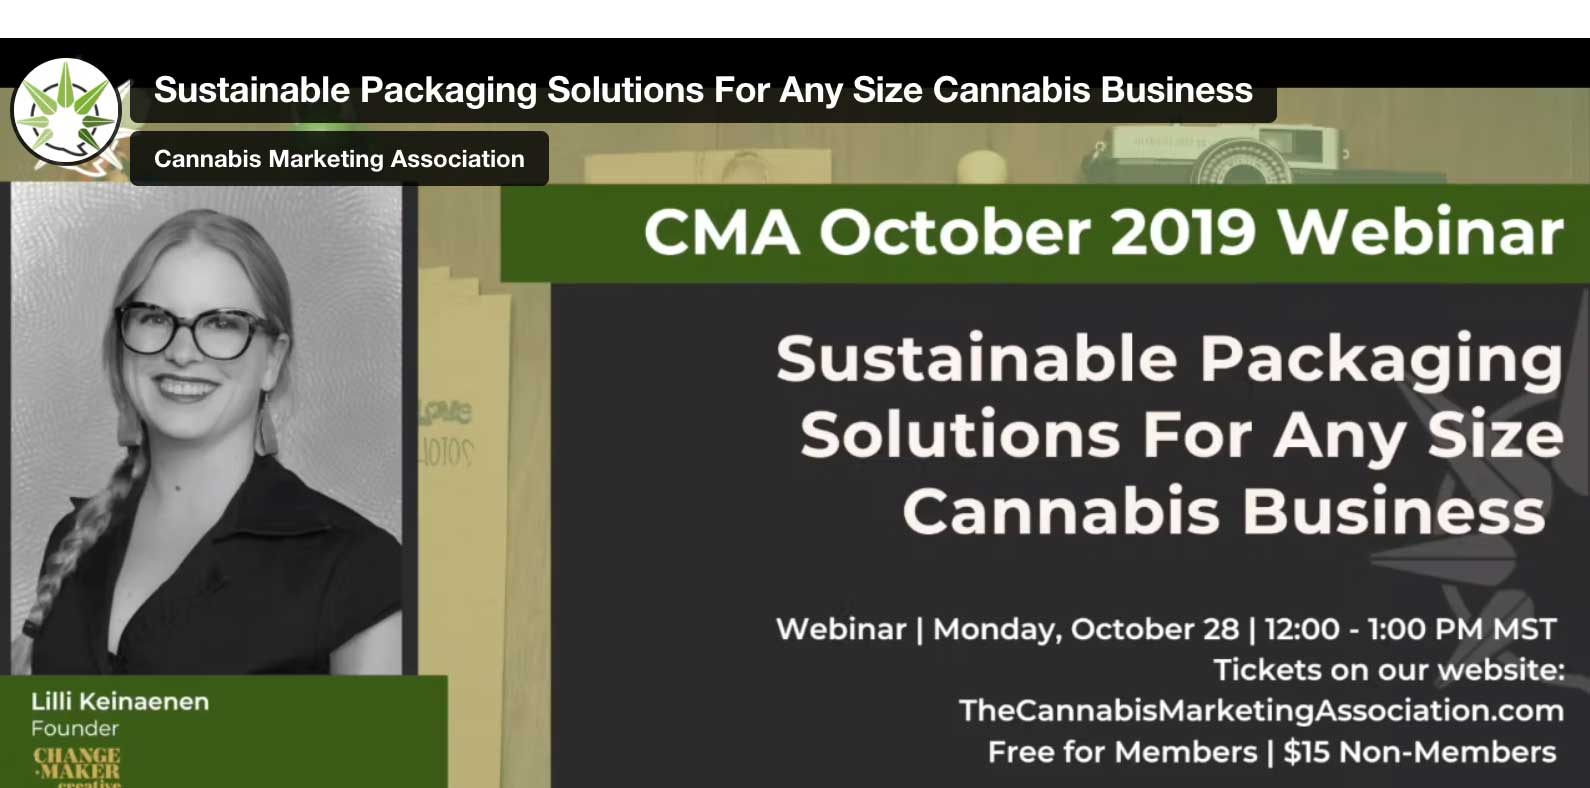 CMA: Sustainable Packaging Solutions For Any Size Cannabis Business